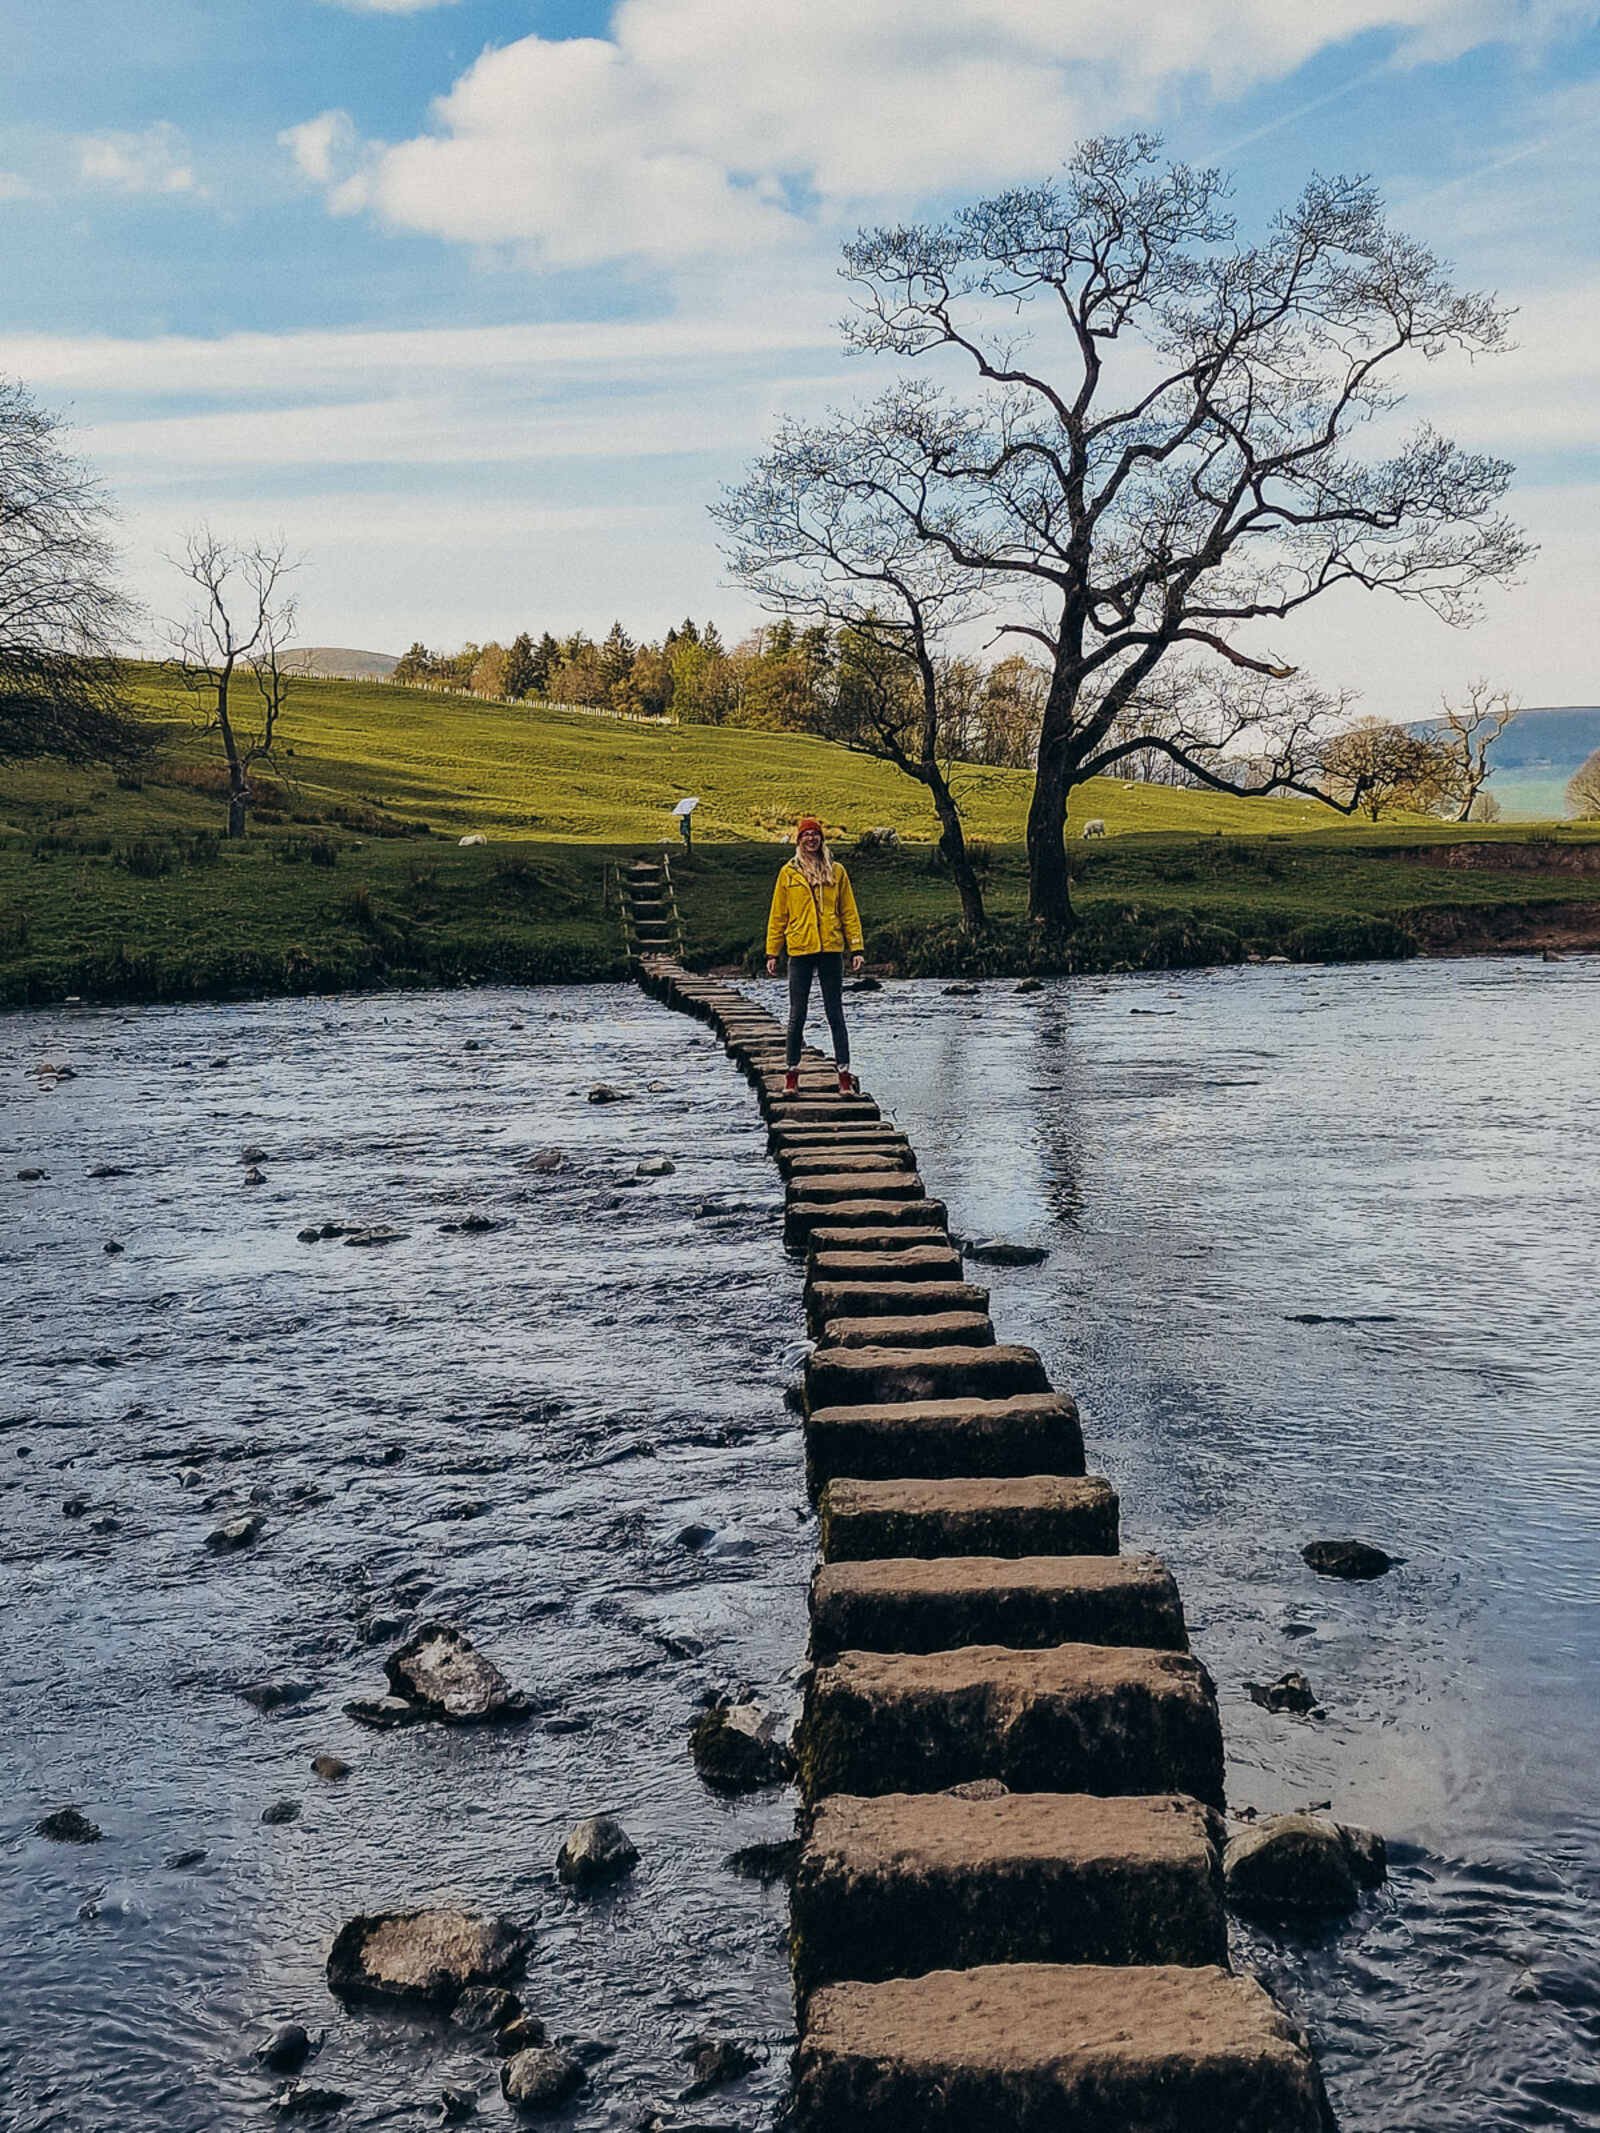 crossing over a long series of stepping stones across a river to a green field beyond